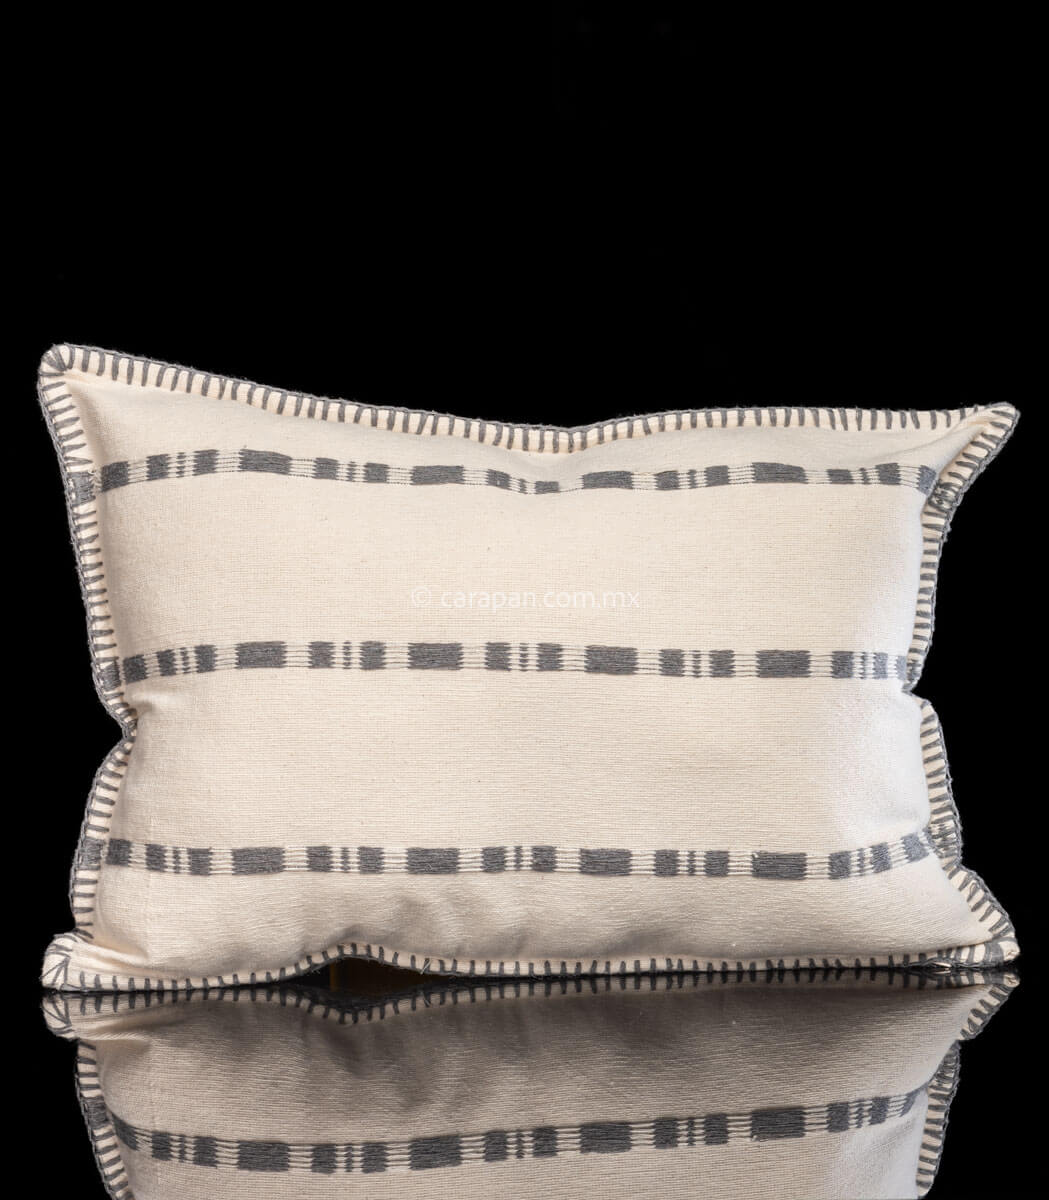 Beige cotton cushion covers rectangular shape with gray stripes. 